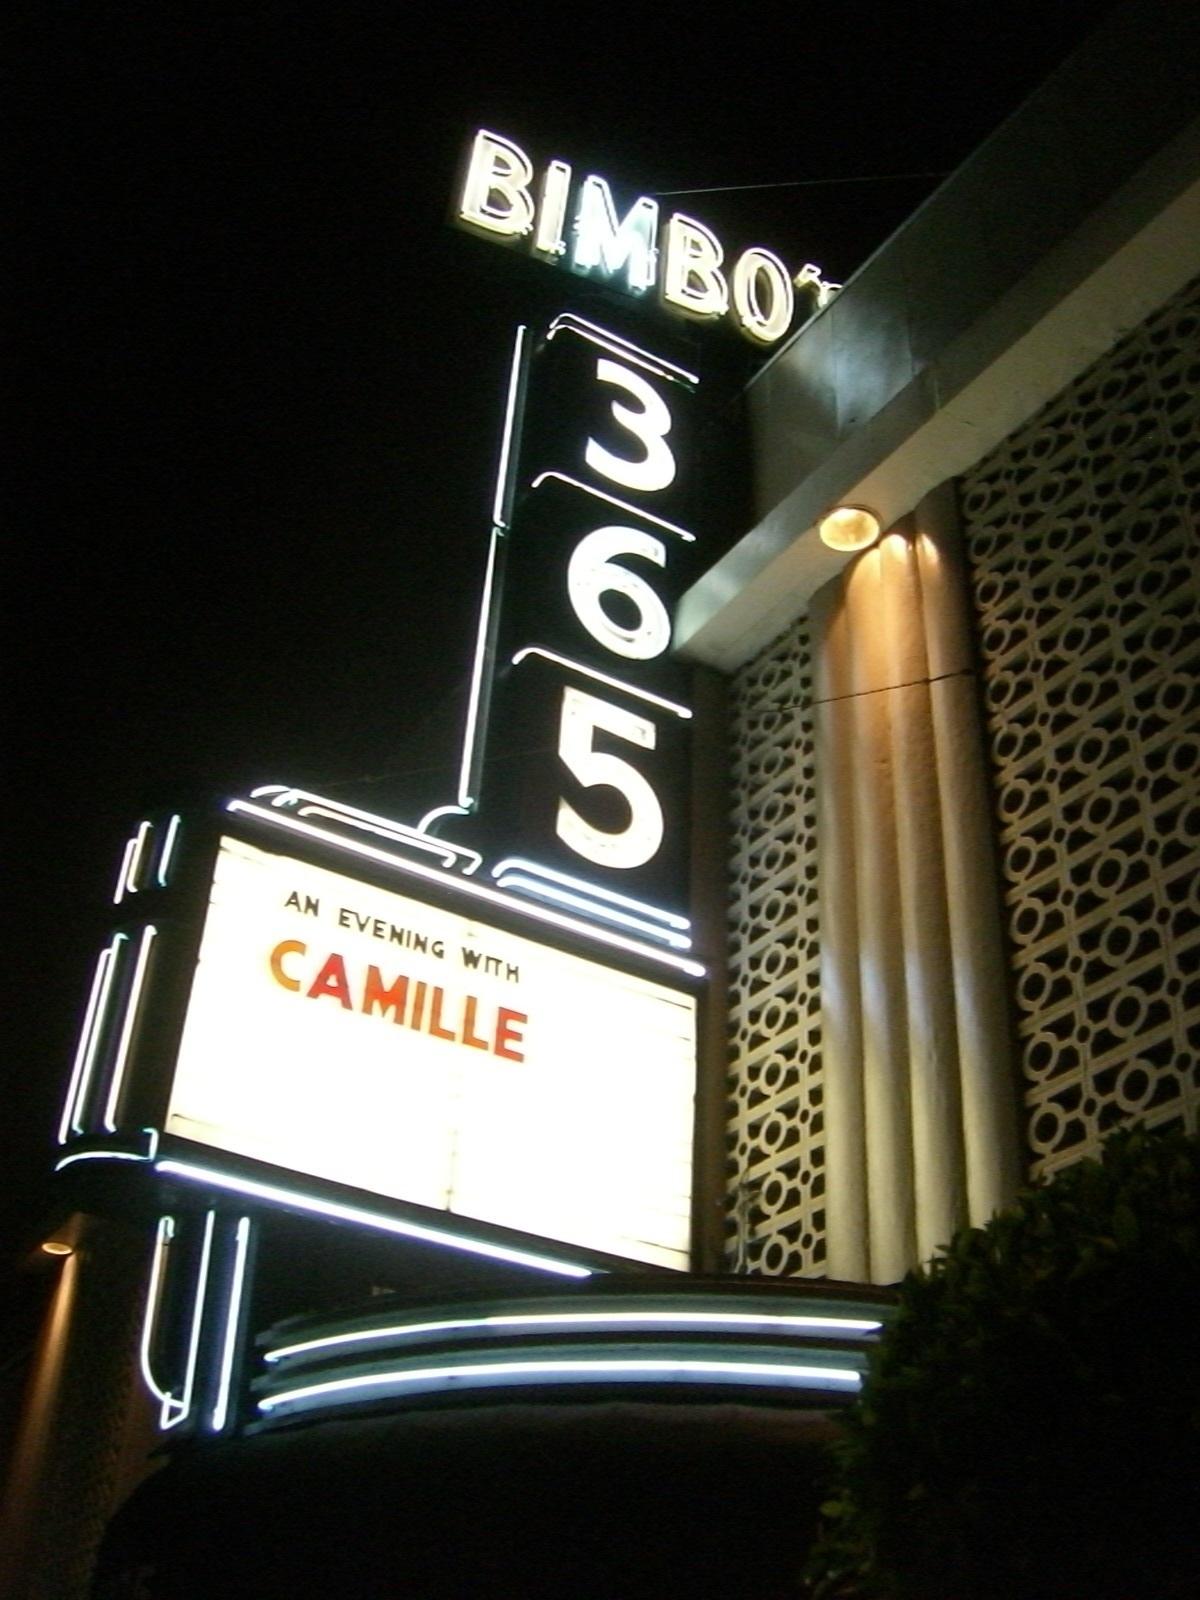 Cover image of this place Bimbo's 365 Club